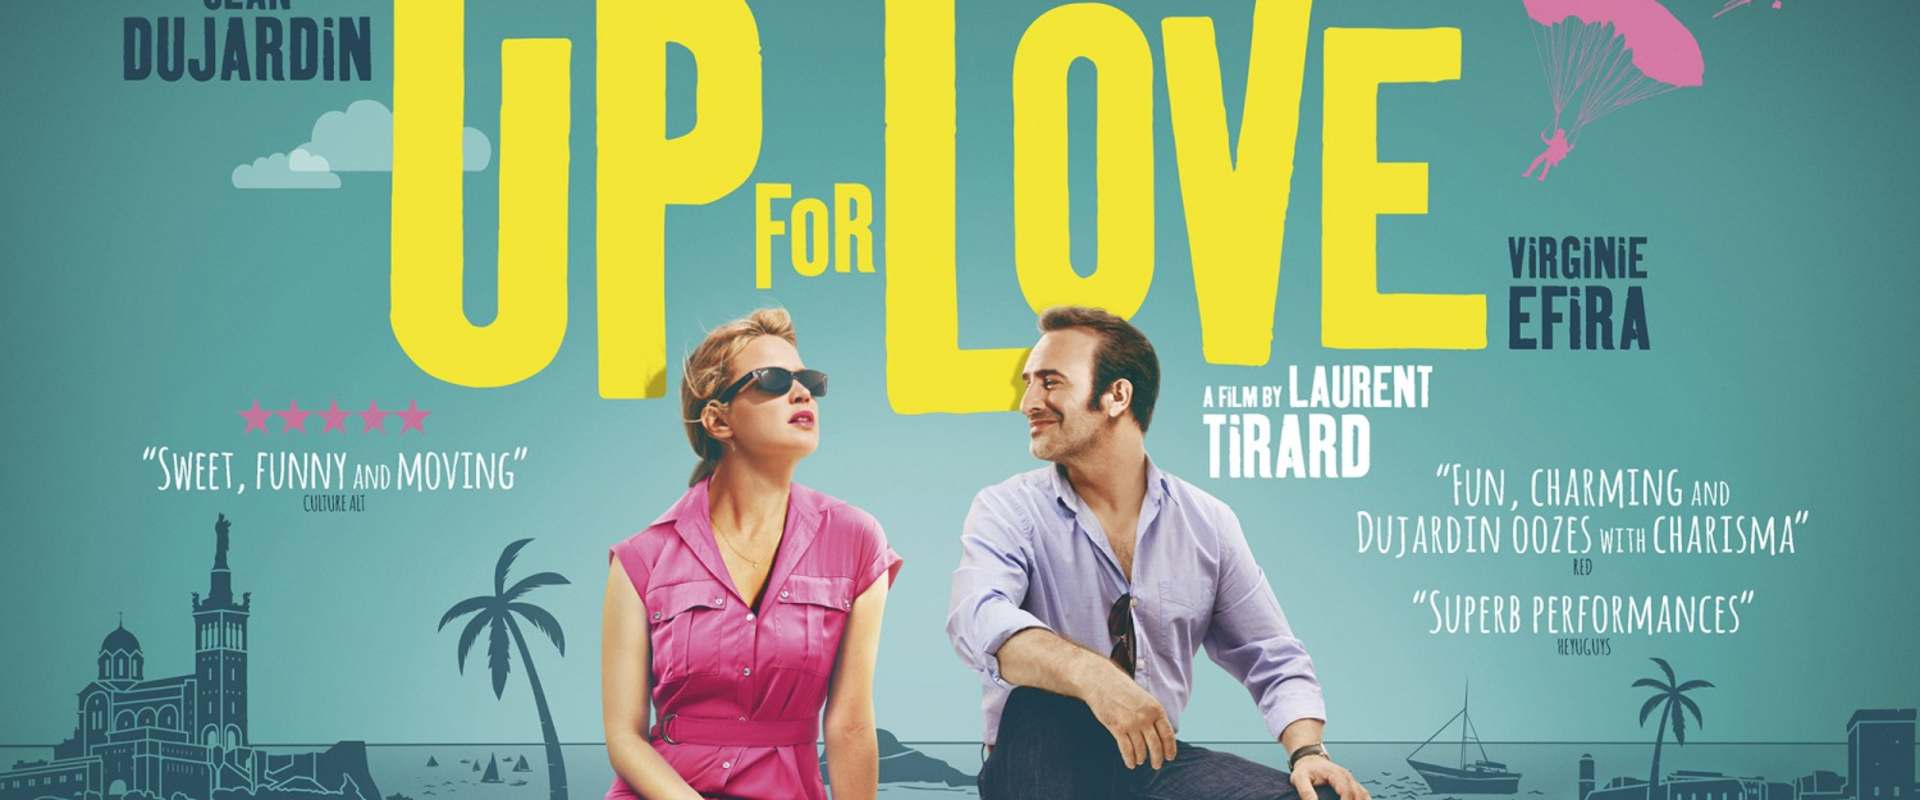 Watch Up for Love on Netflix Today! | NetflixMovies.com